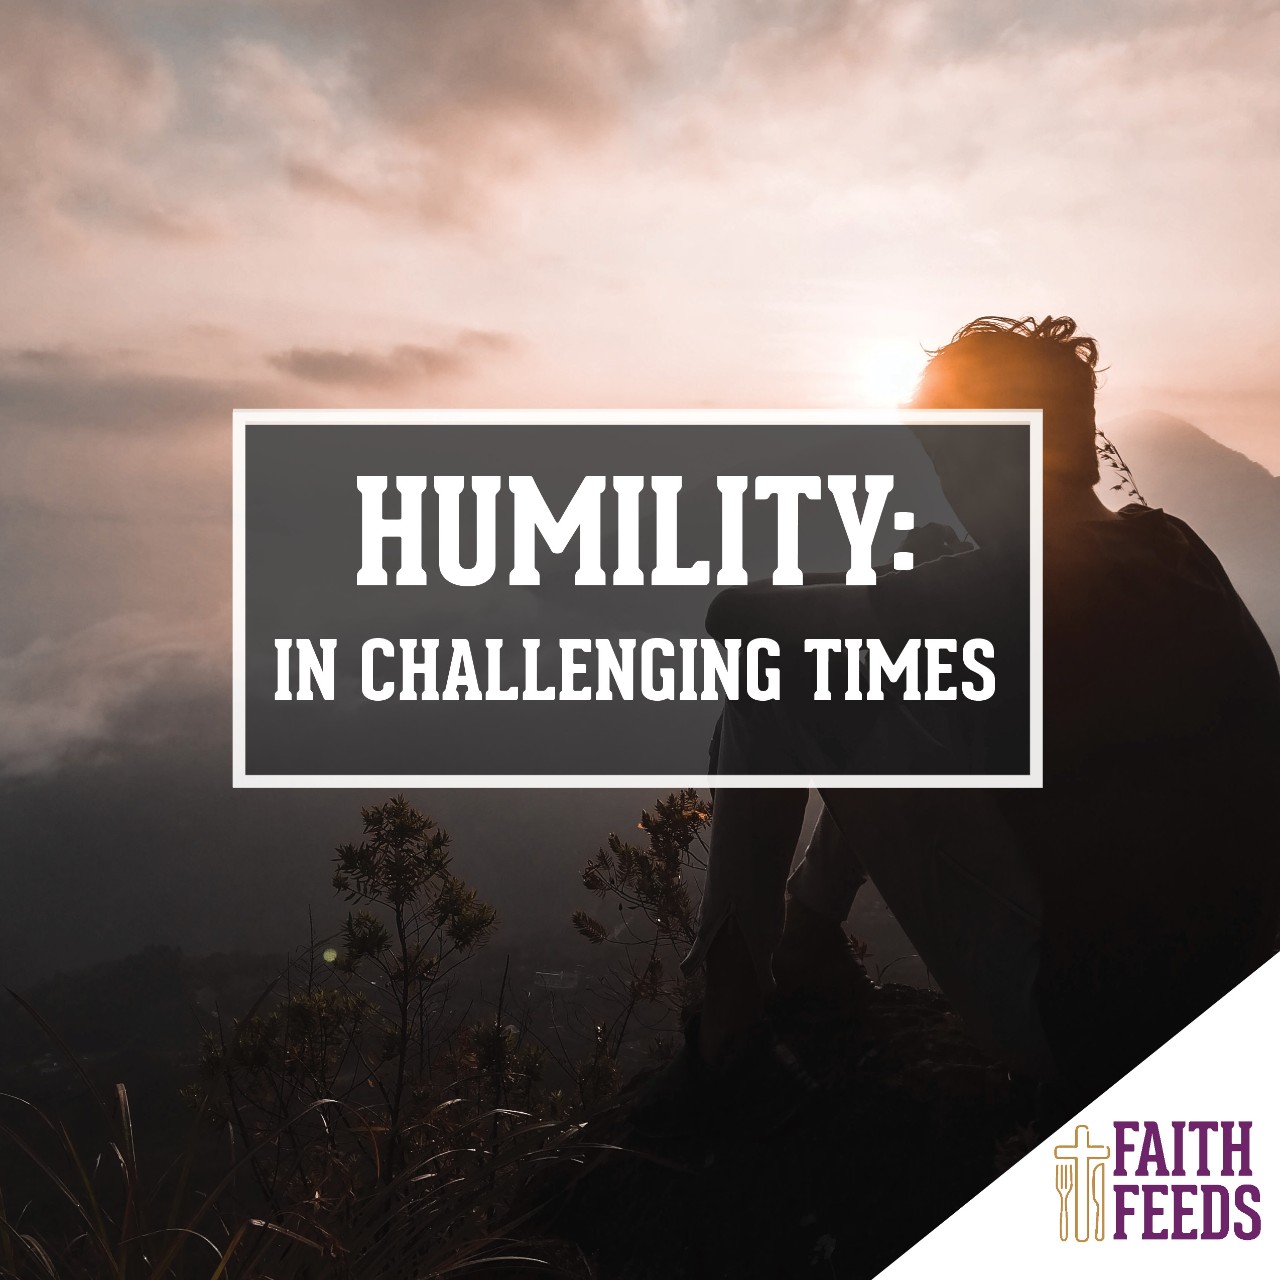 Humility: In Challenging Times